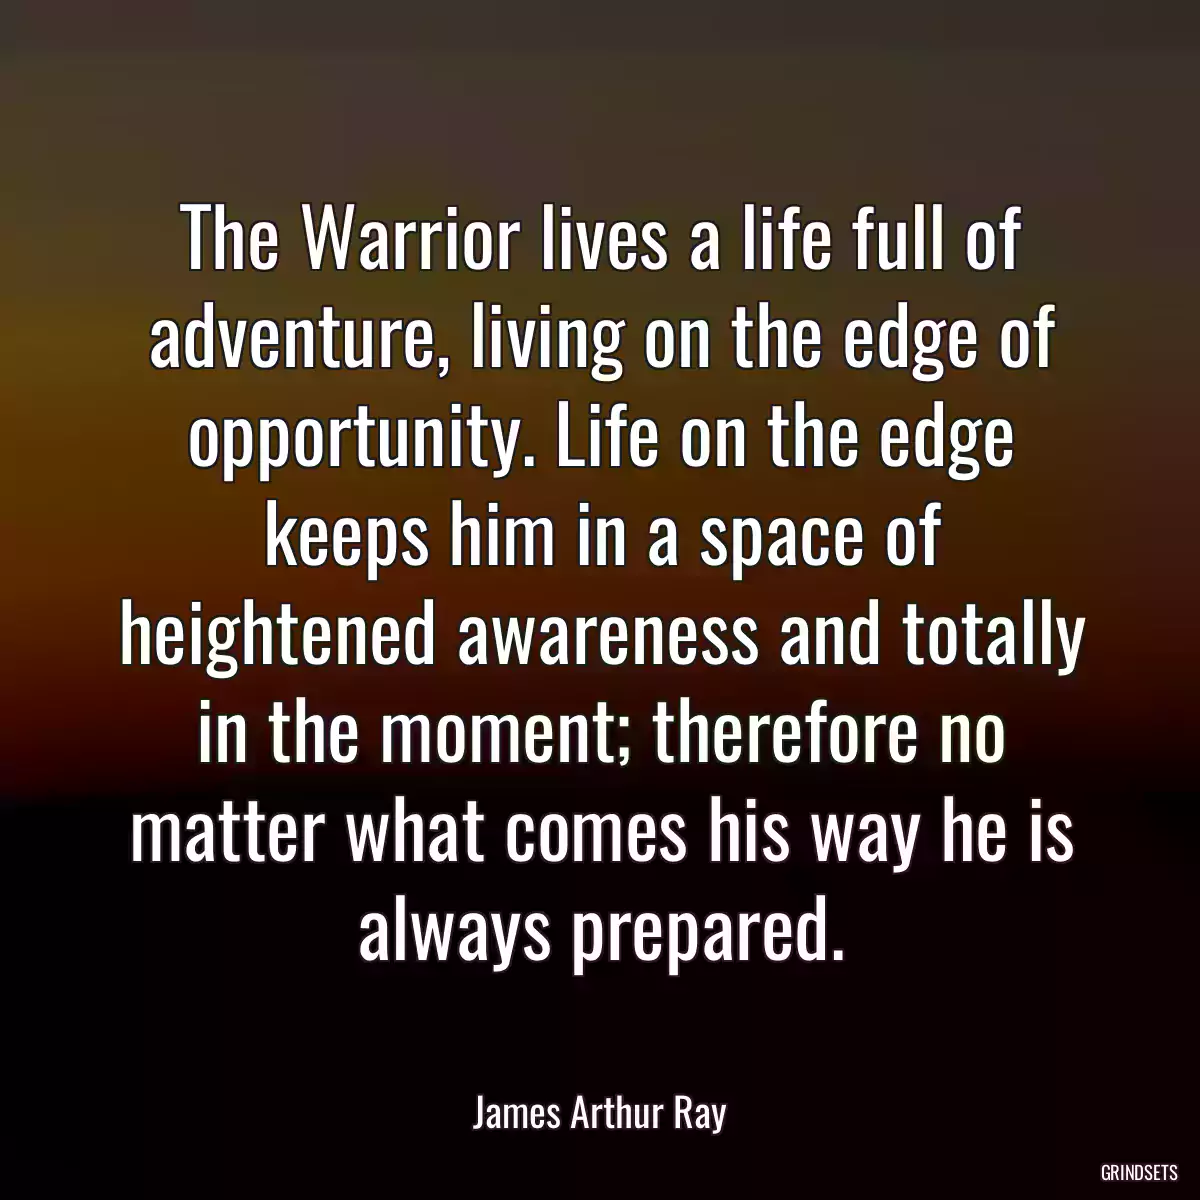 The Warrior lives a life full of adventure, living on the edge of opportunity. Life on the edge keeps him in a space of heightened awareness and totally in the moment; therefore no matter what comes his way he is always prepared.